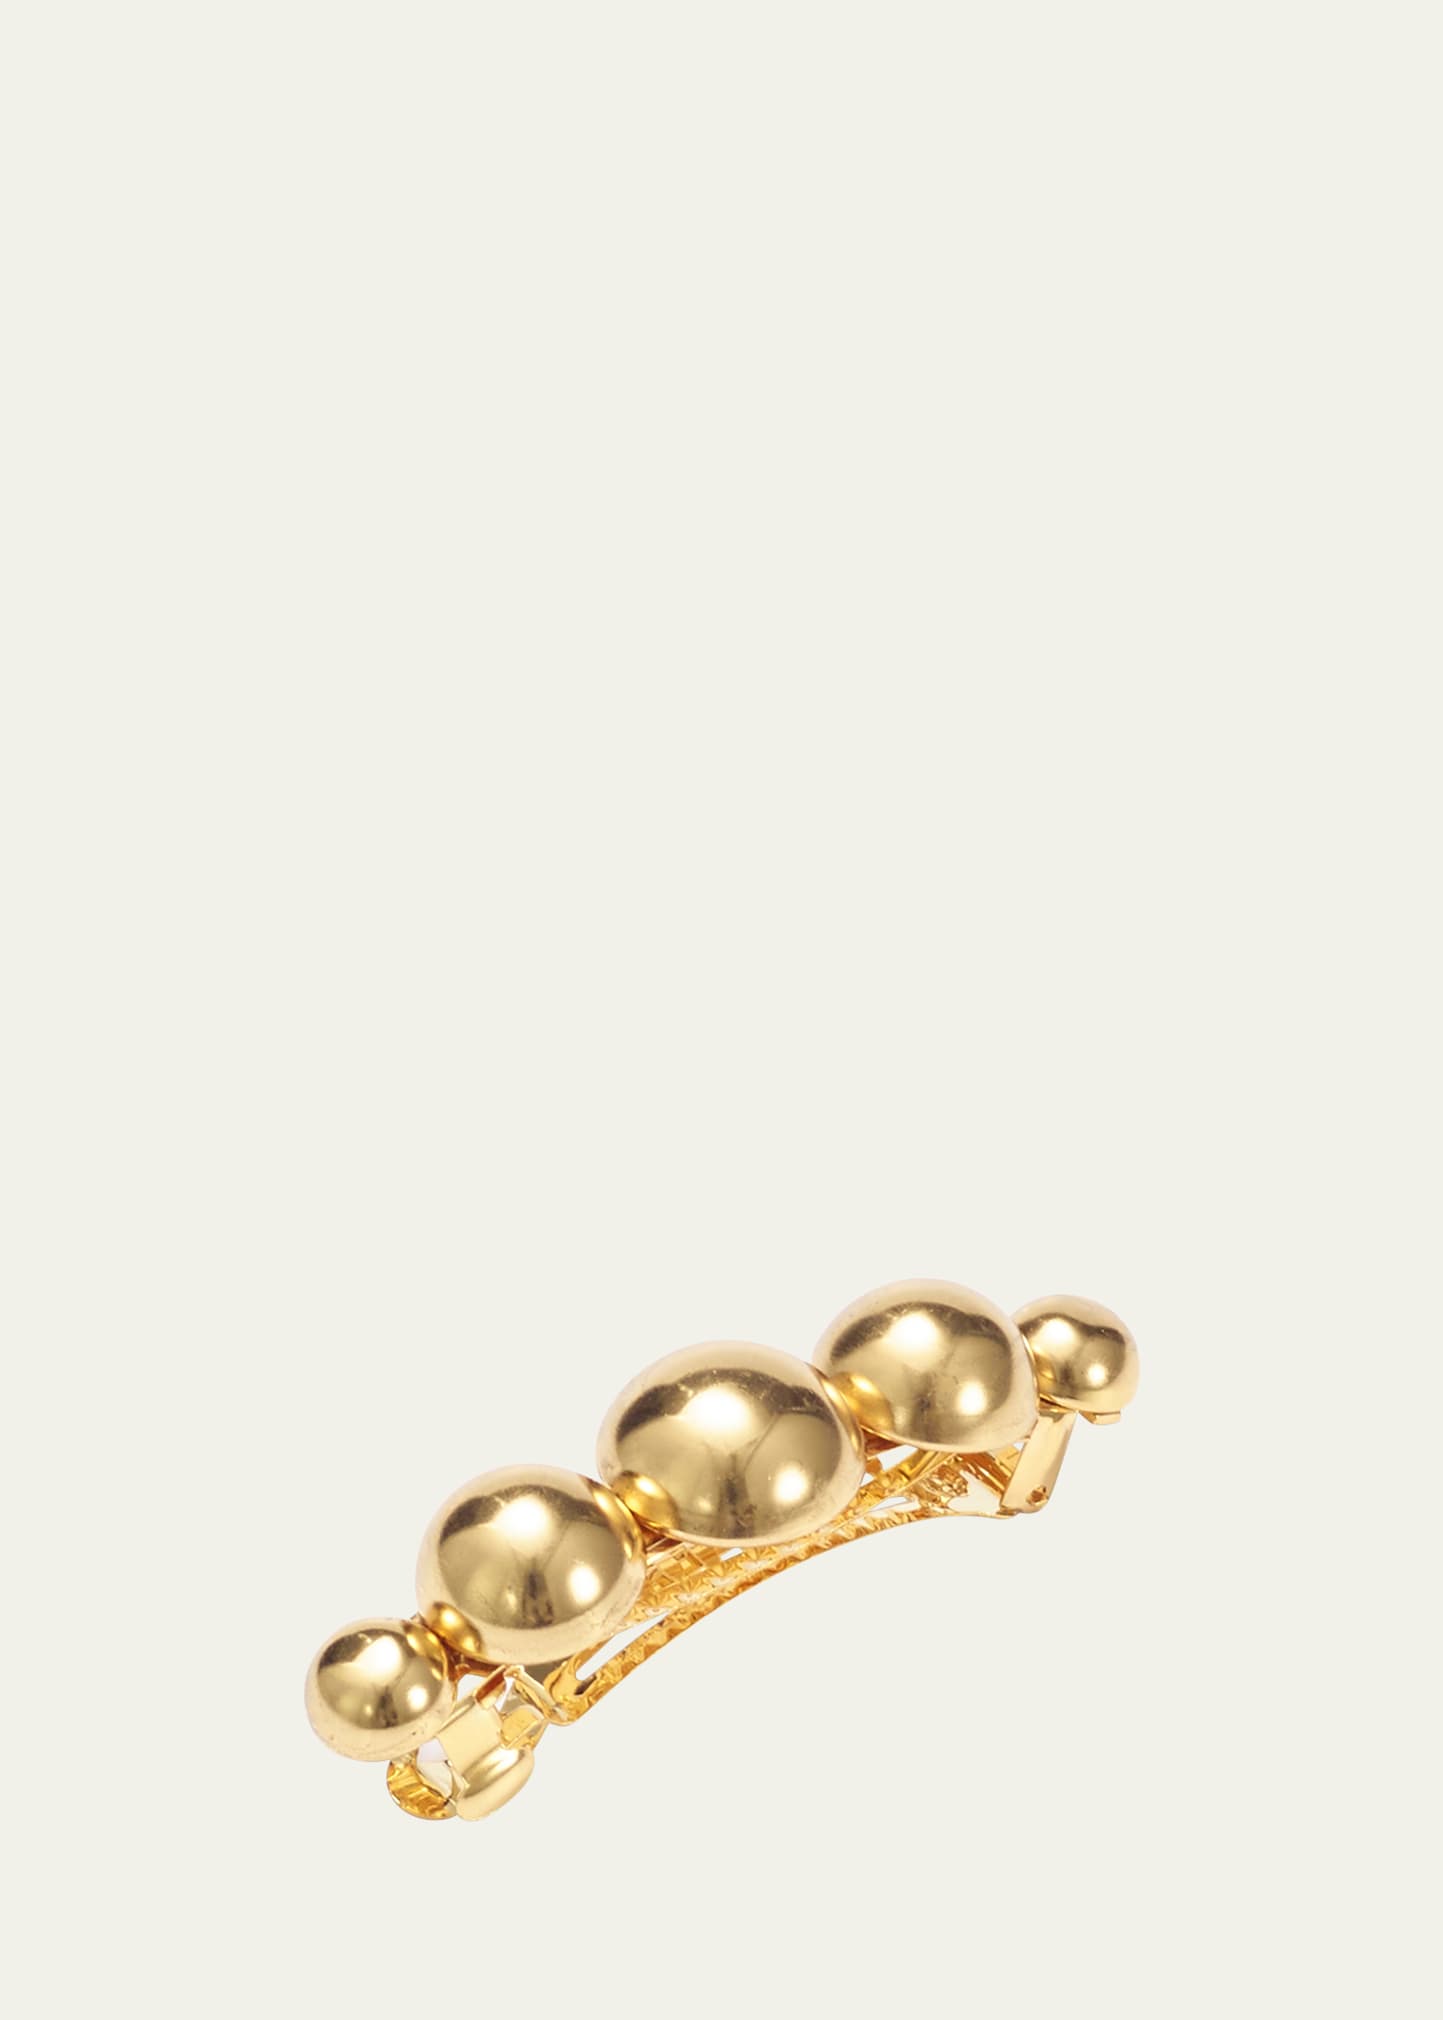 Lelet Ny Linear Bauble French Barrette